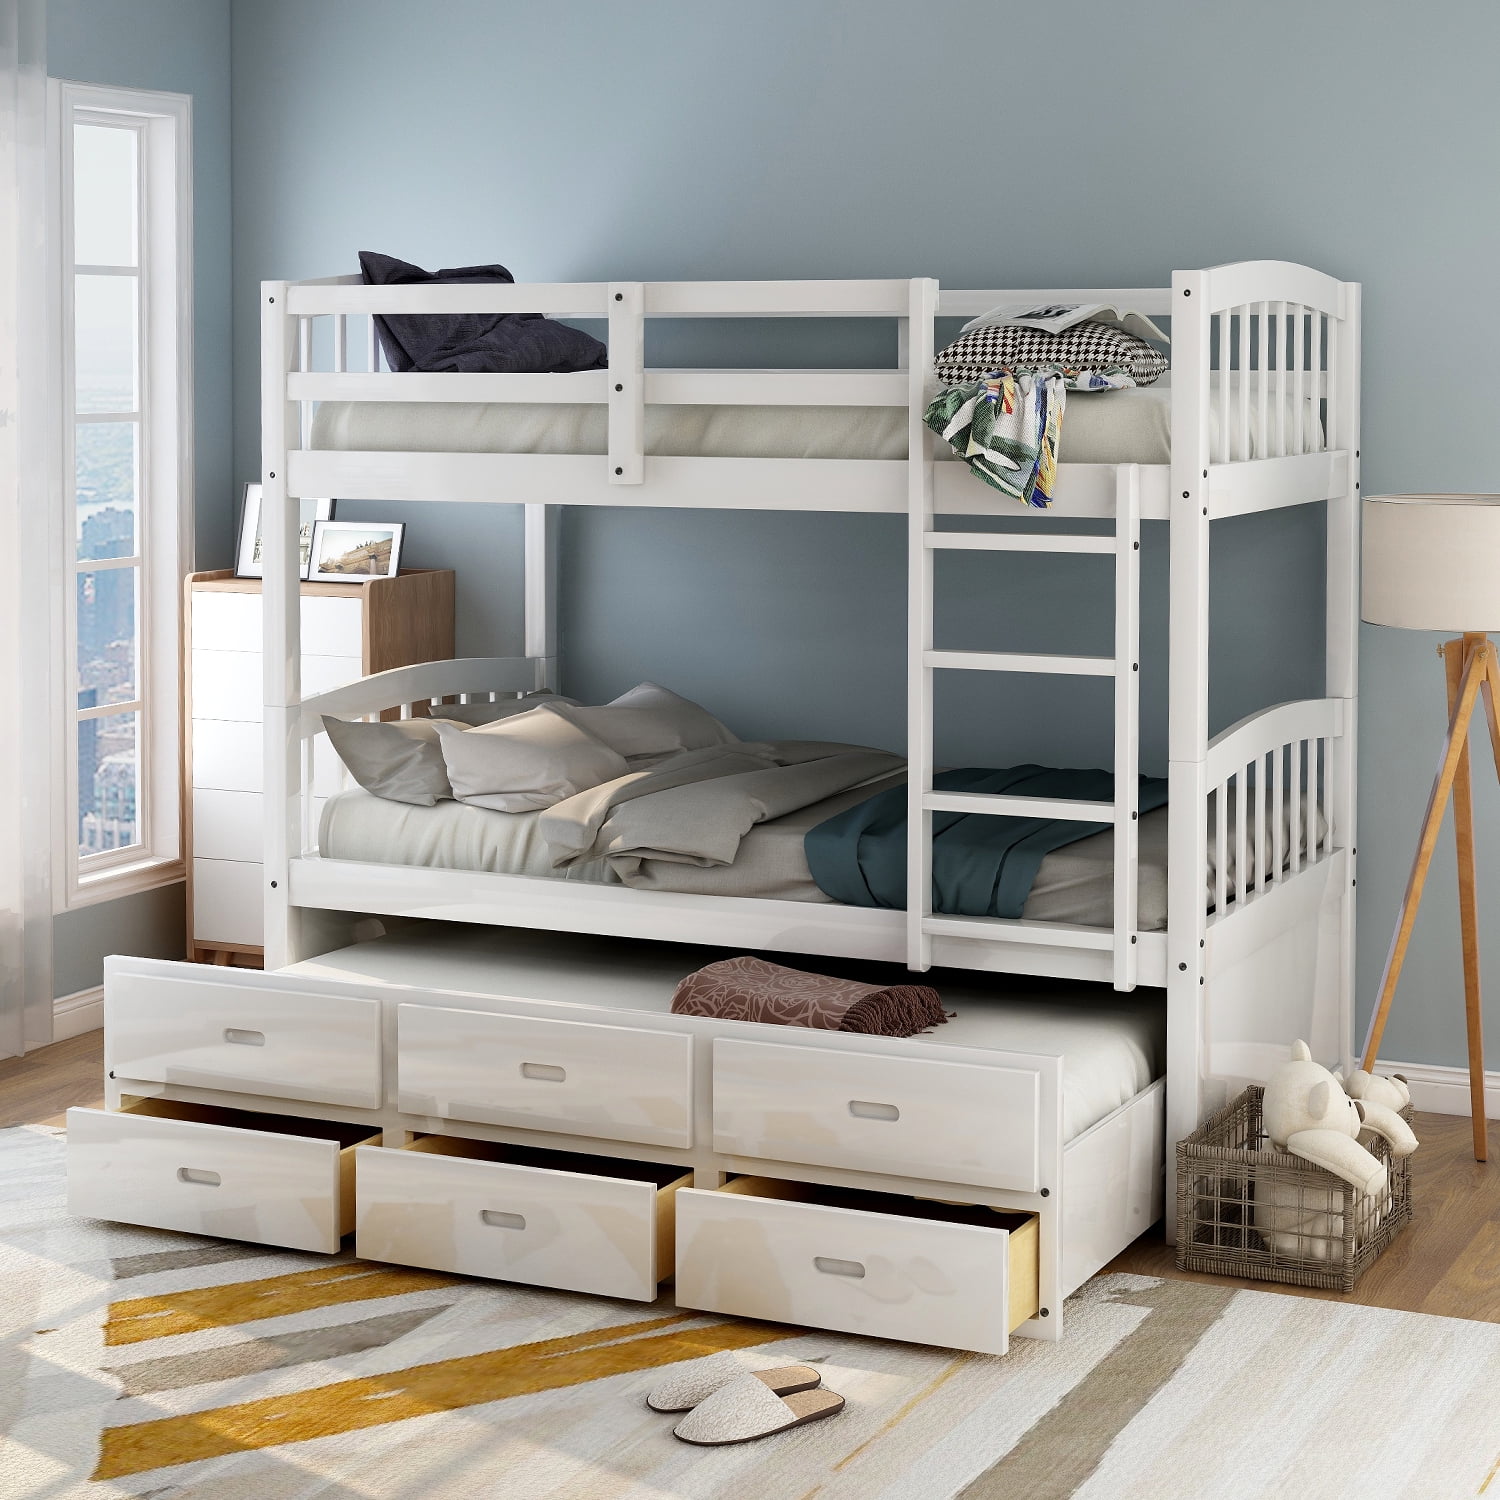 Euroco Twin Over Wood Bunk Bed, Bunk Bed With Trundle Desk And Drawers